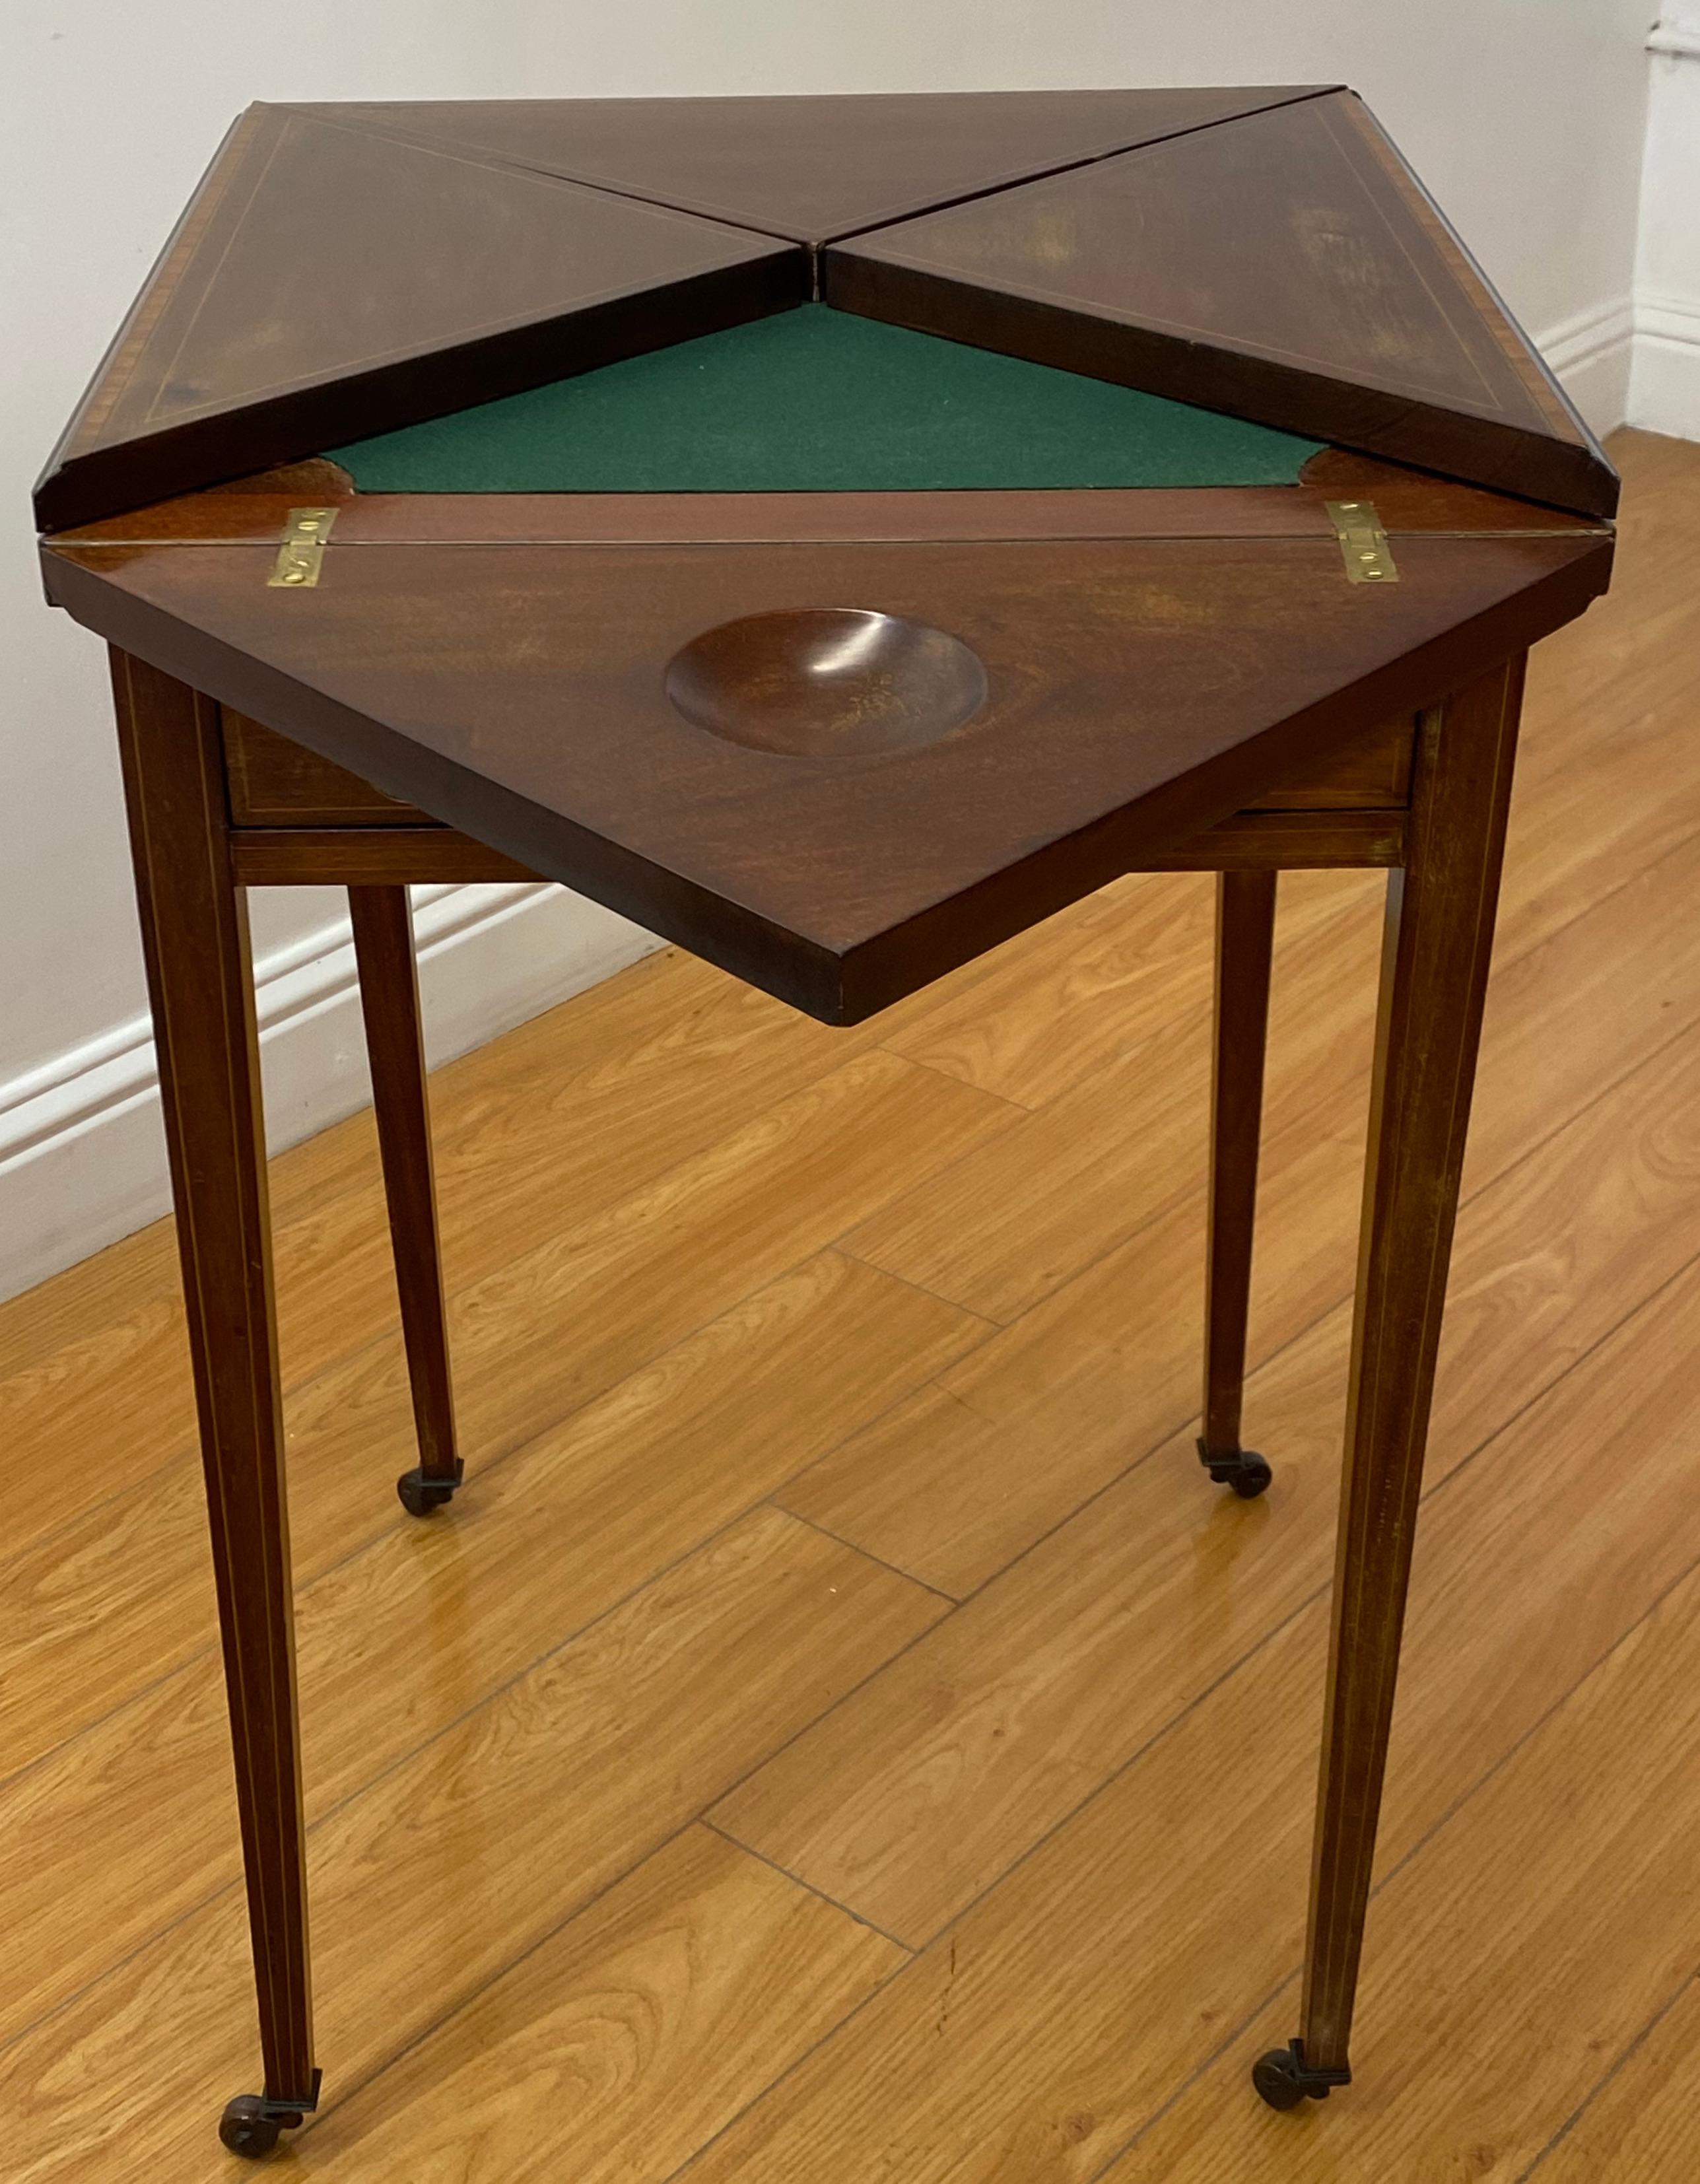 American Vintage Inlaid Mahogany Handkerchief Folding Games / Side Table, C.1940 For Sale